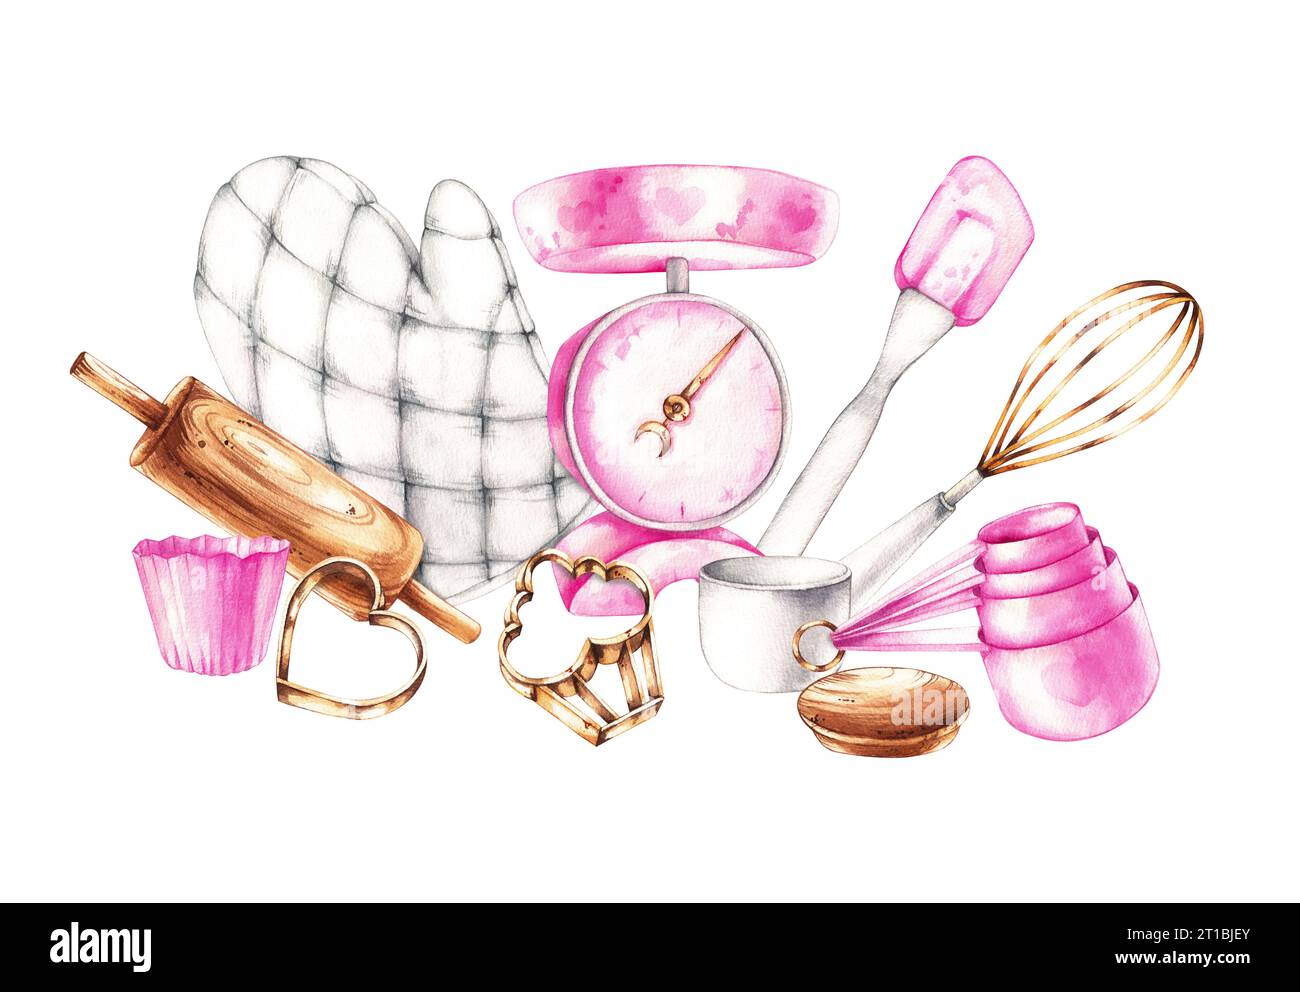 https://c8.alamy.com/comp/2T1BJEY/watercolor-composition-of-baking-tools-isolated-on-a-white-pink-pastry-chef-tools-for-design-postcard-packaging-label-package-restaurant-2T1BJEY.jpg